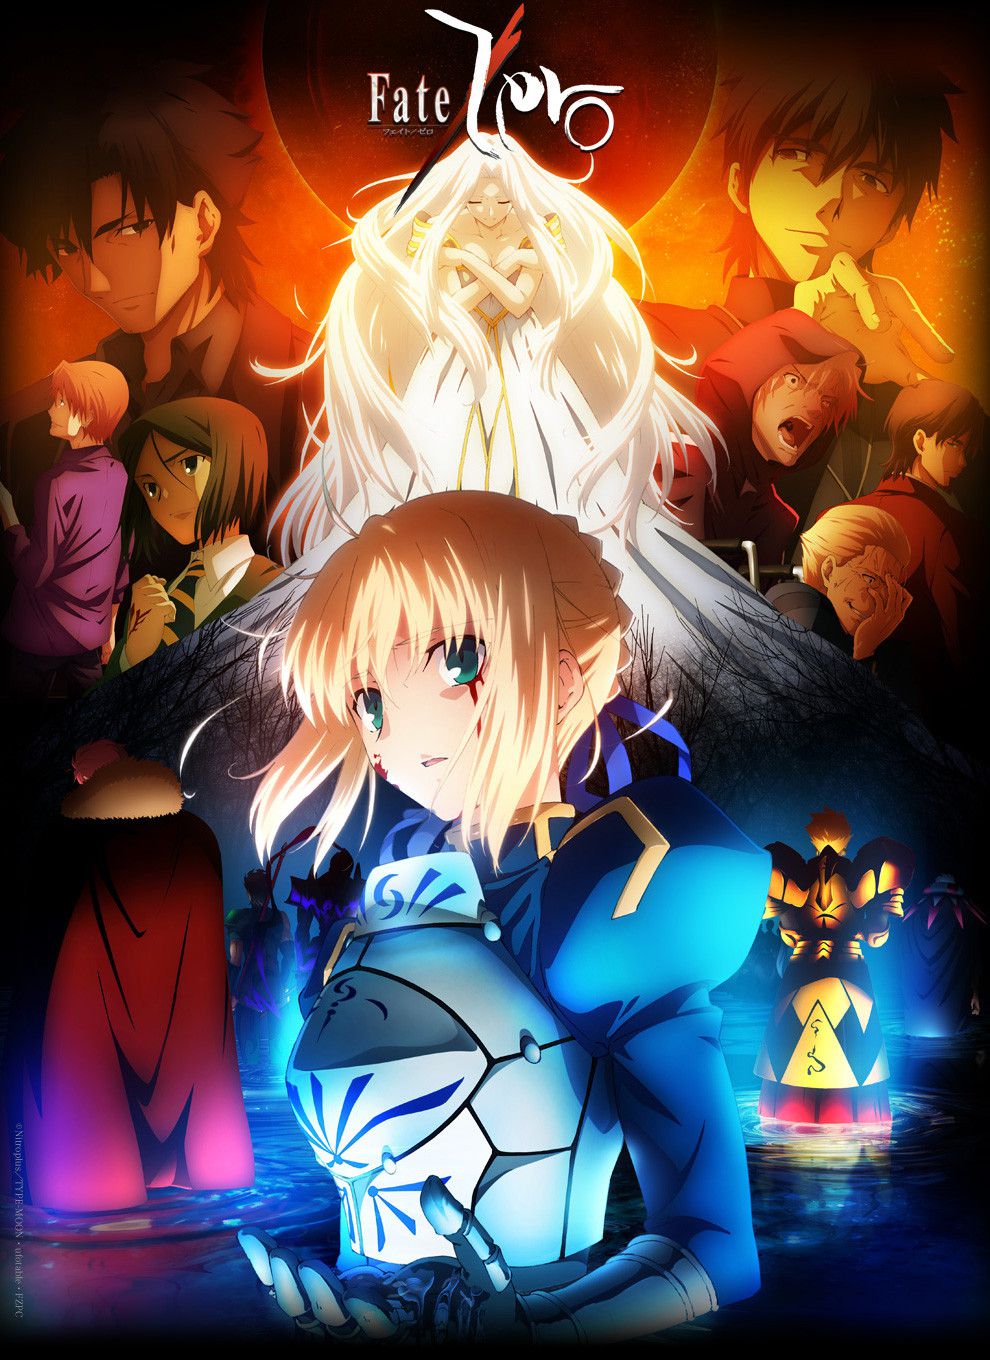 Fate/zero 2 - Anime (2012) streaming VF gratuit complet